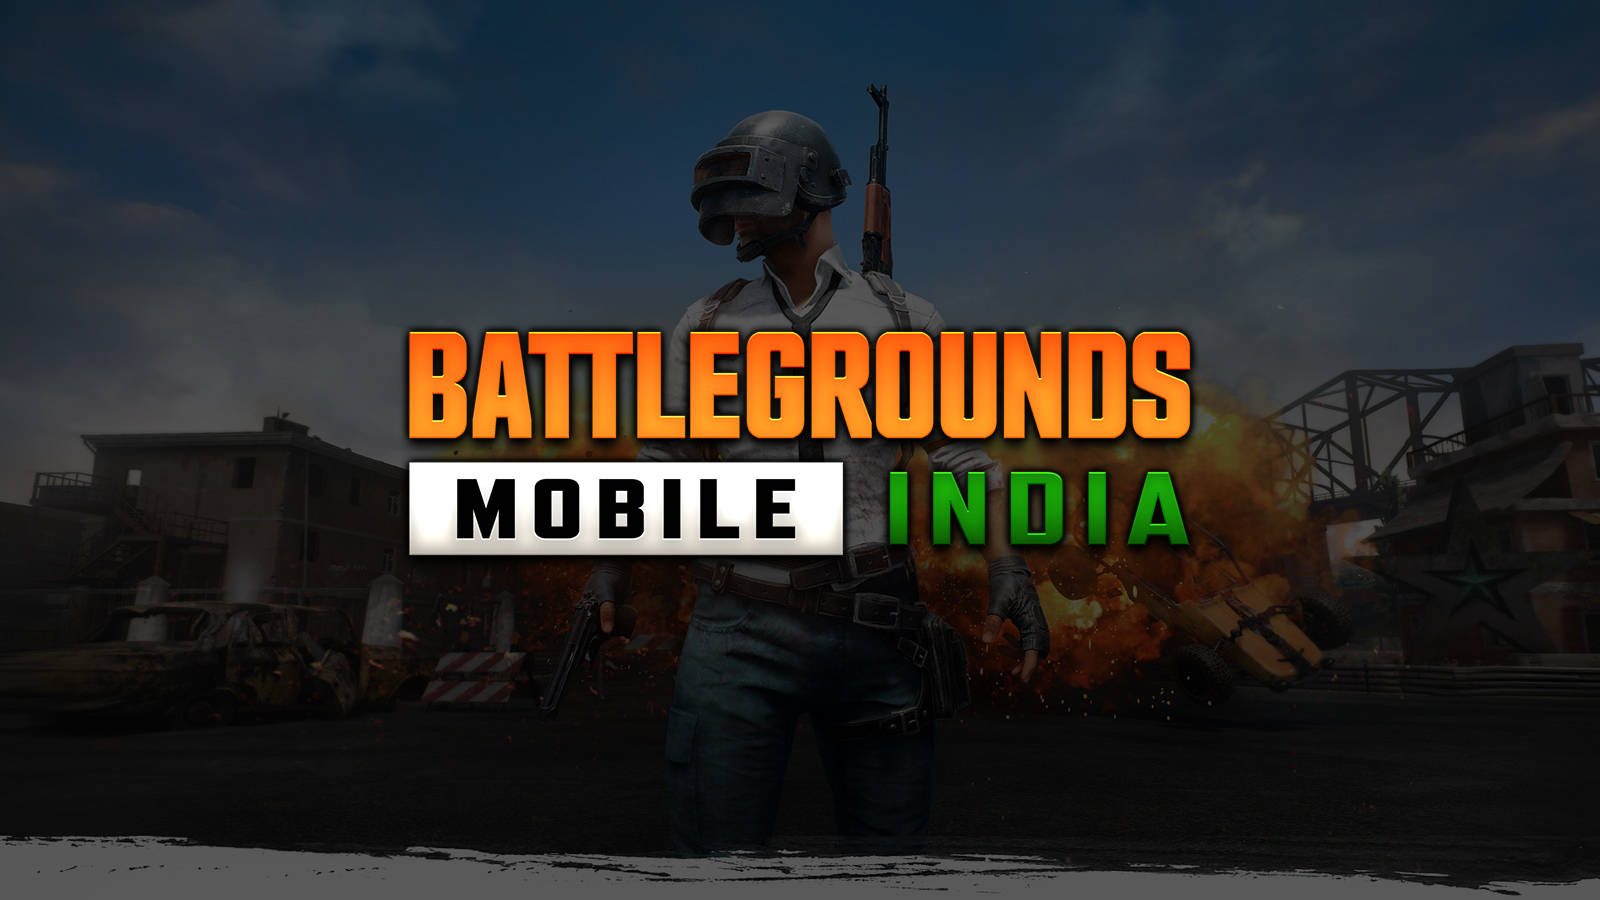 Battleground India Colourful Mobile Game Title Wallpaper